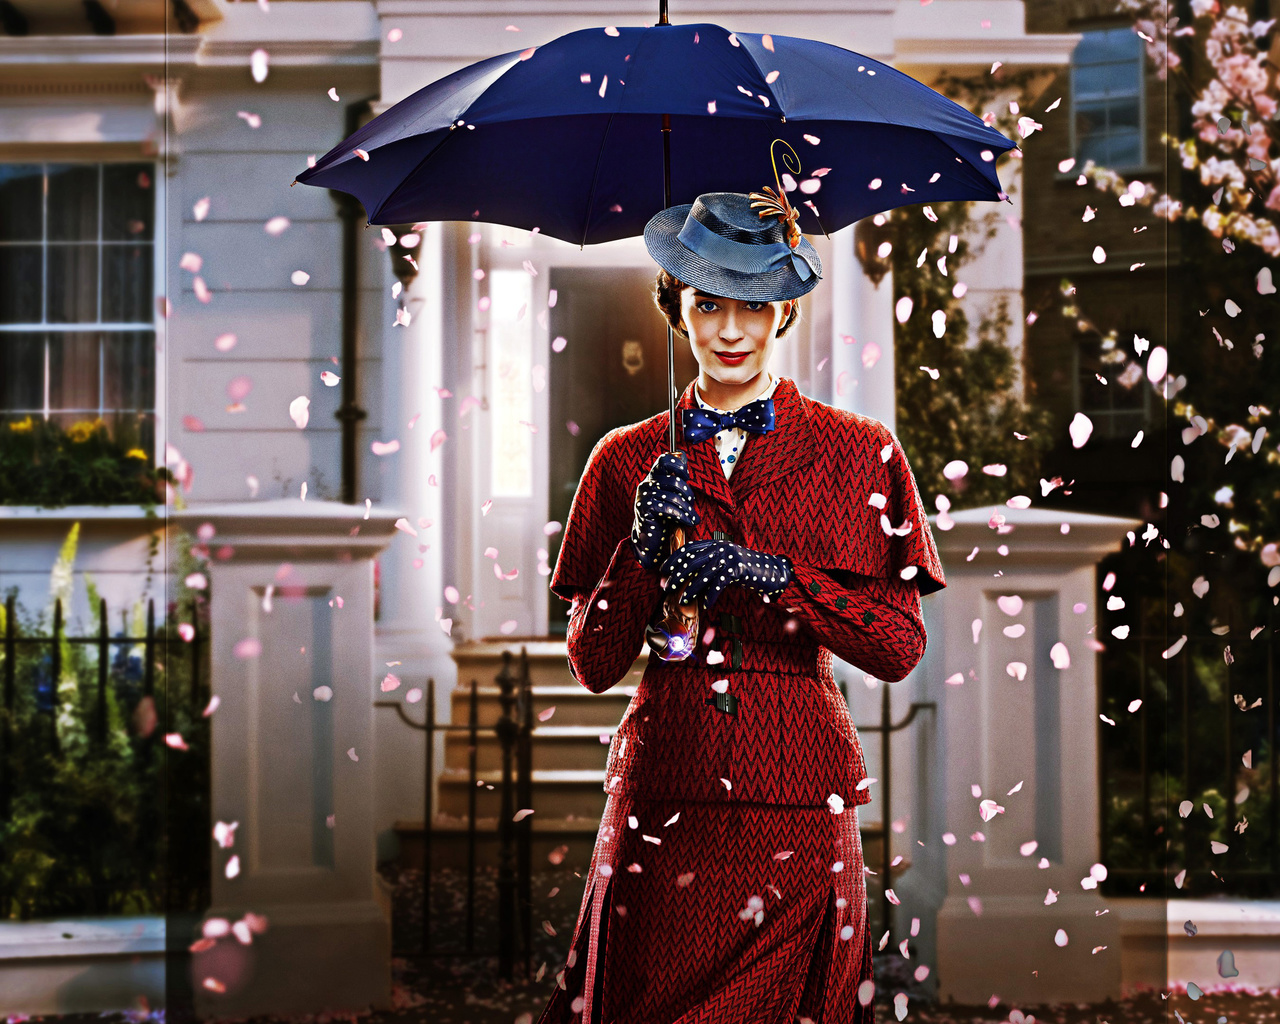 mary poppins returns, promotional materials, main character, emily blunt